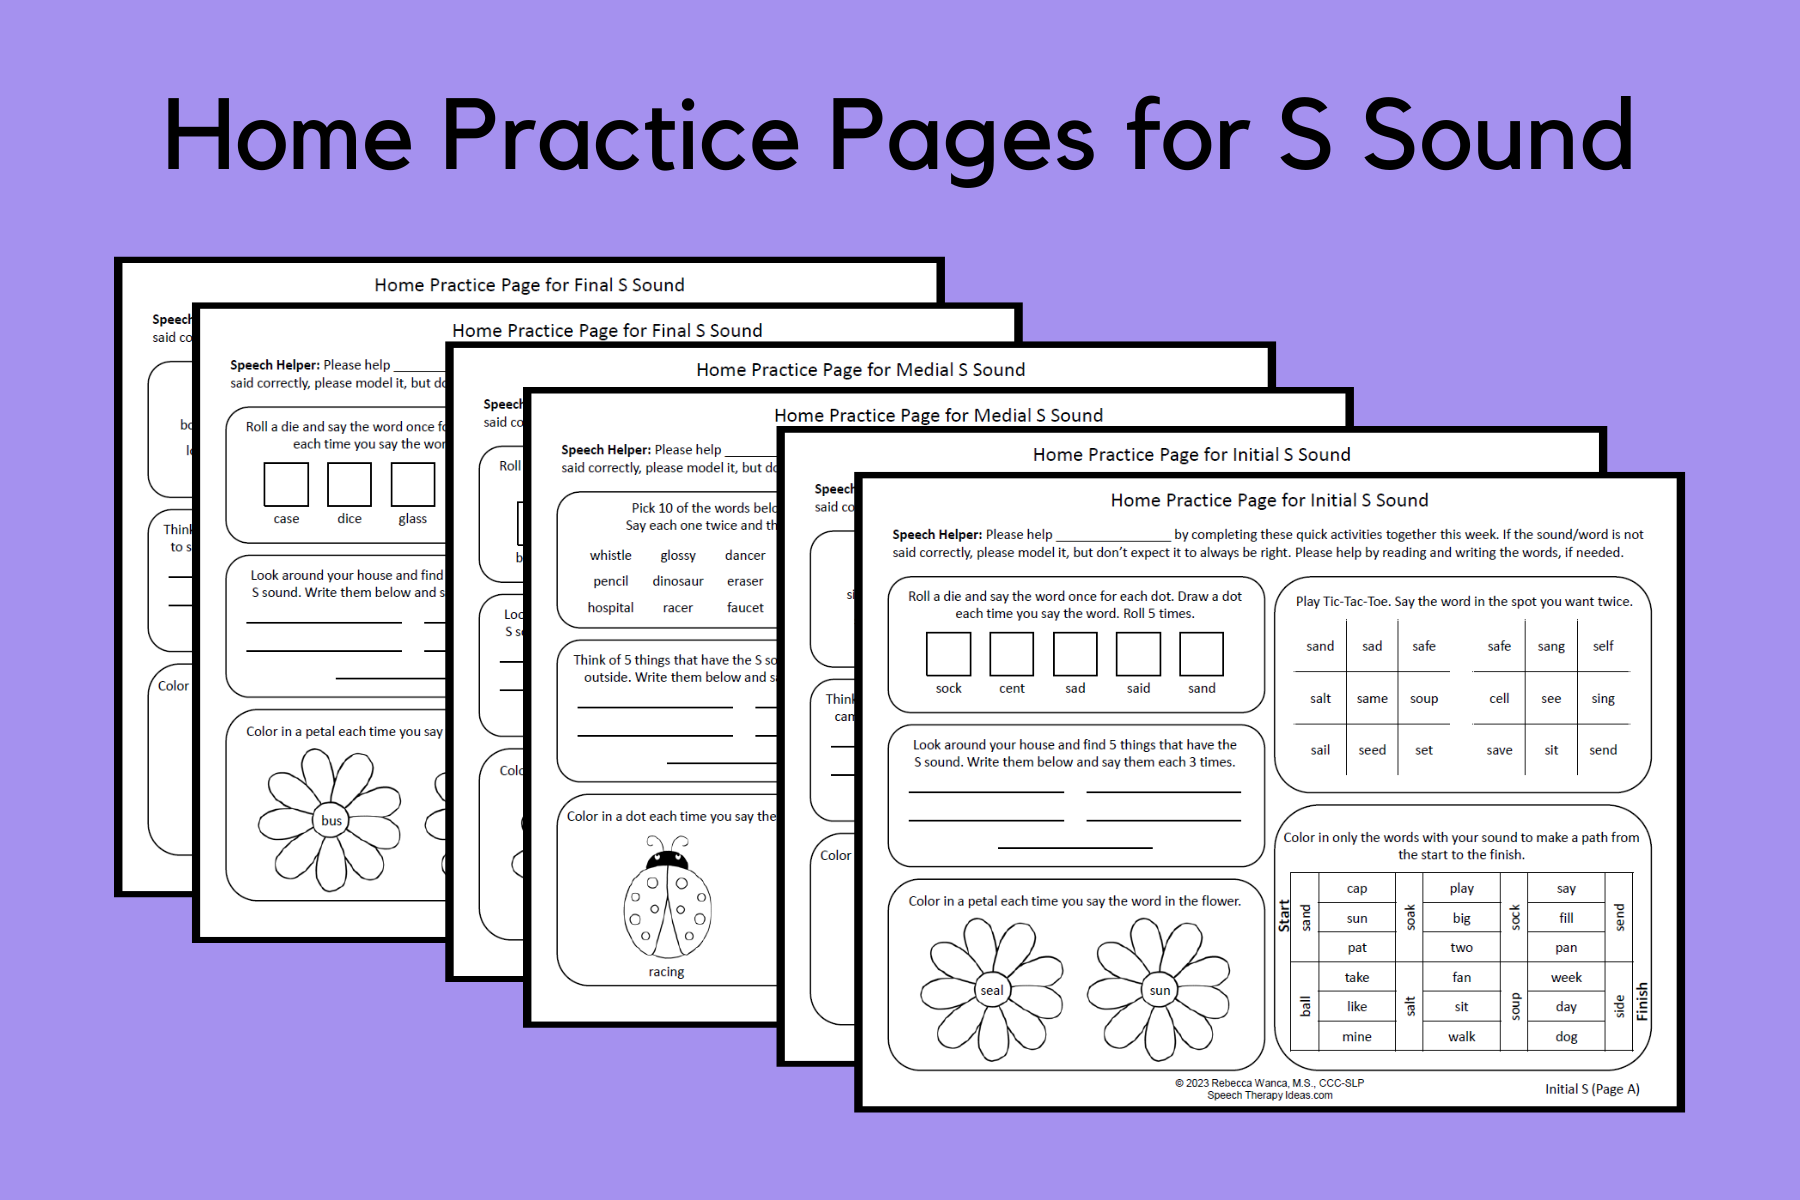 Home Practice Pages for S Sound